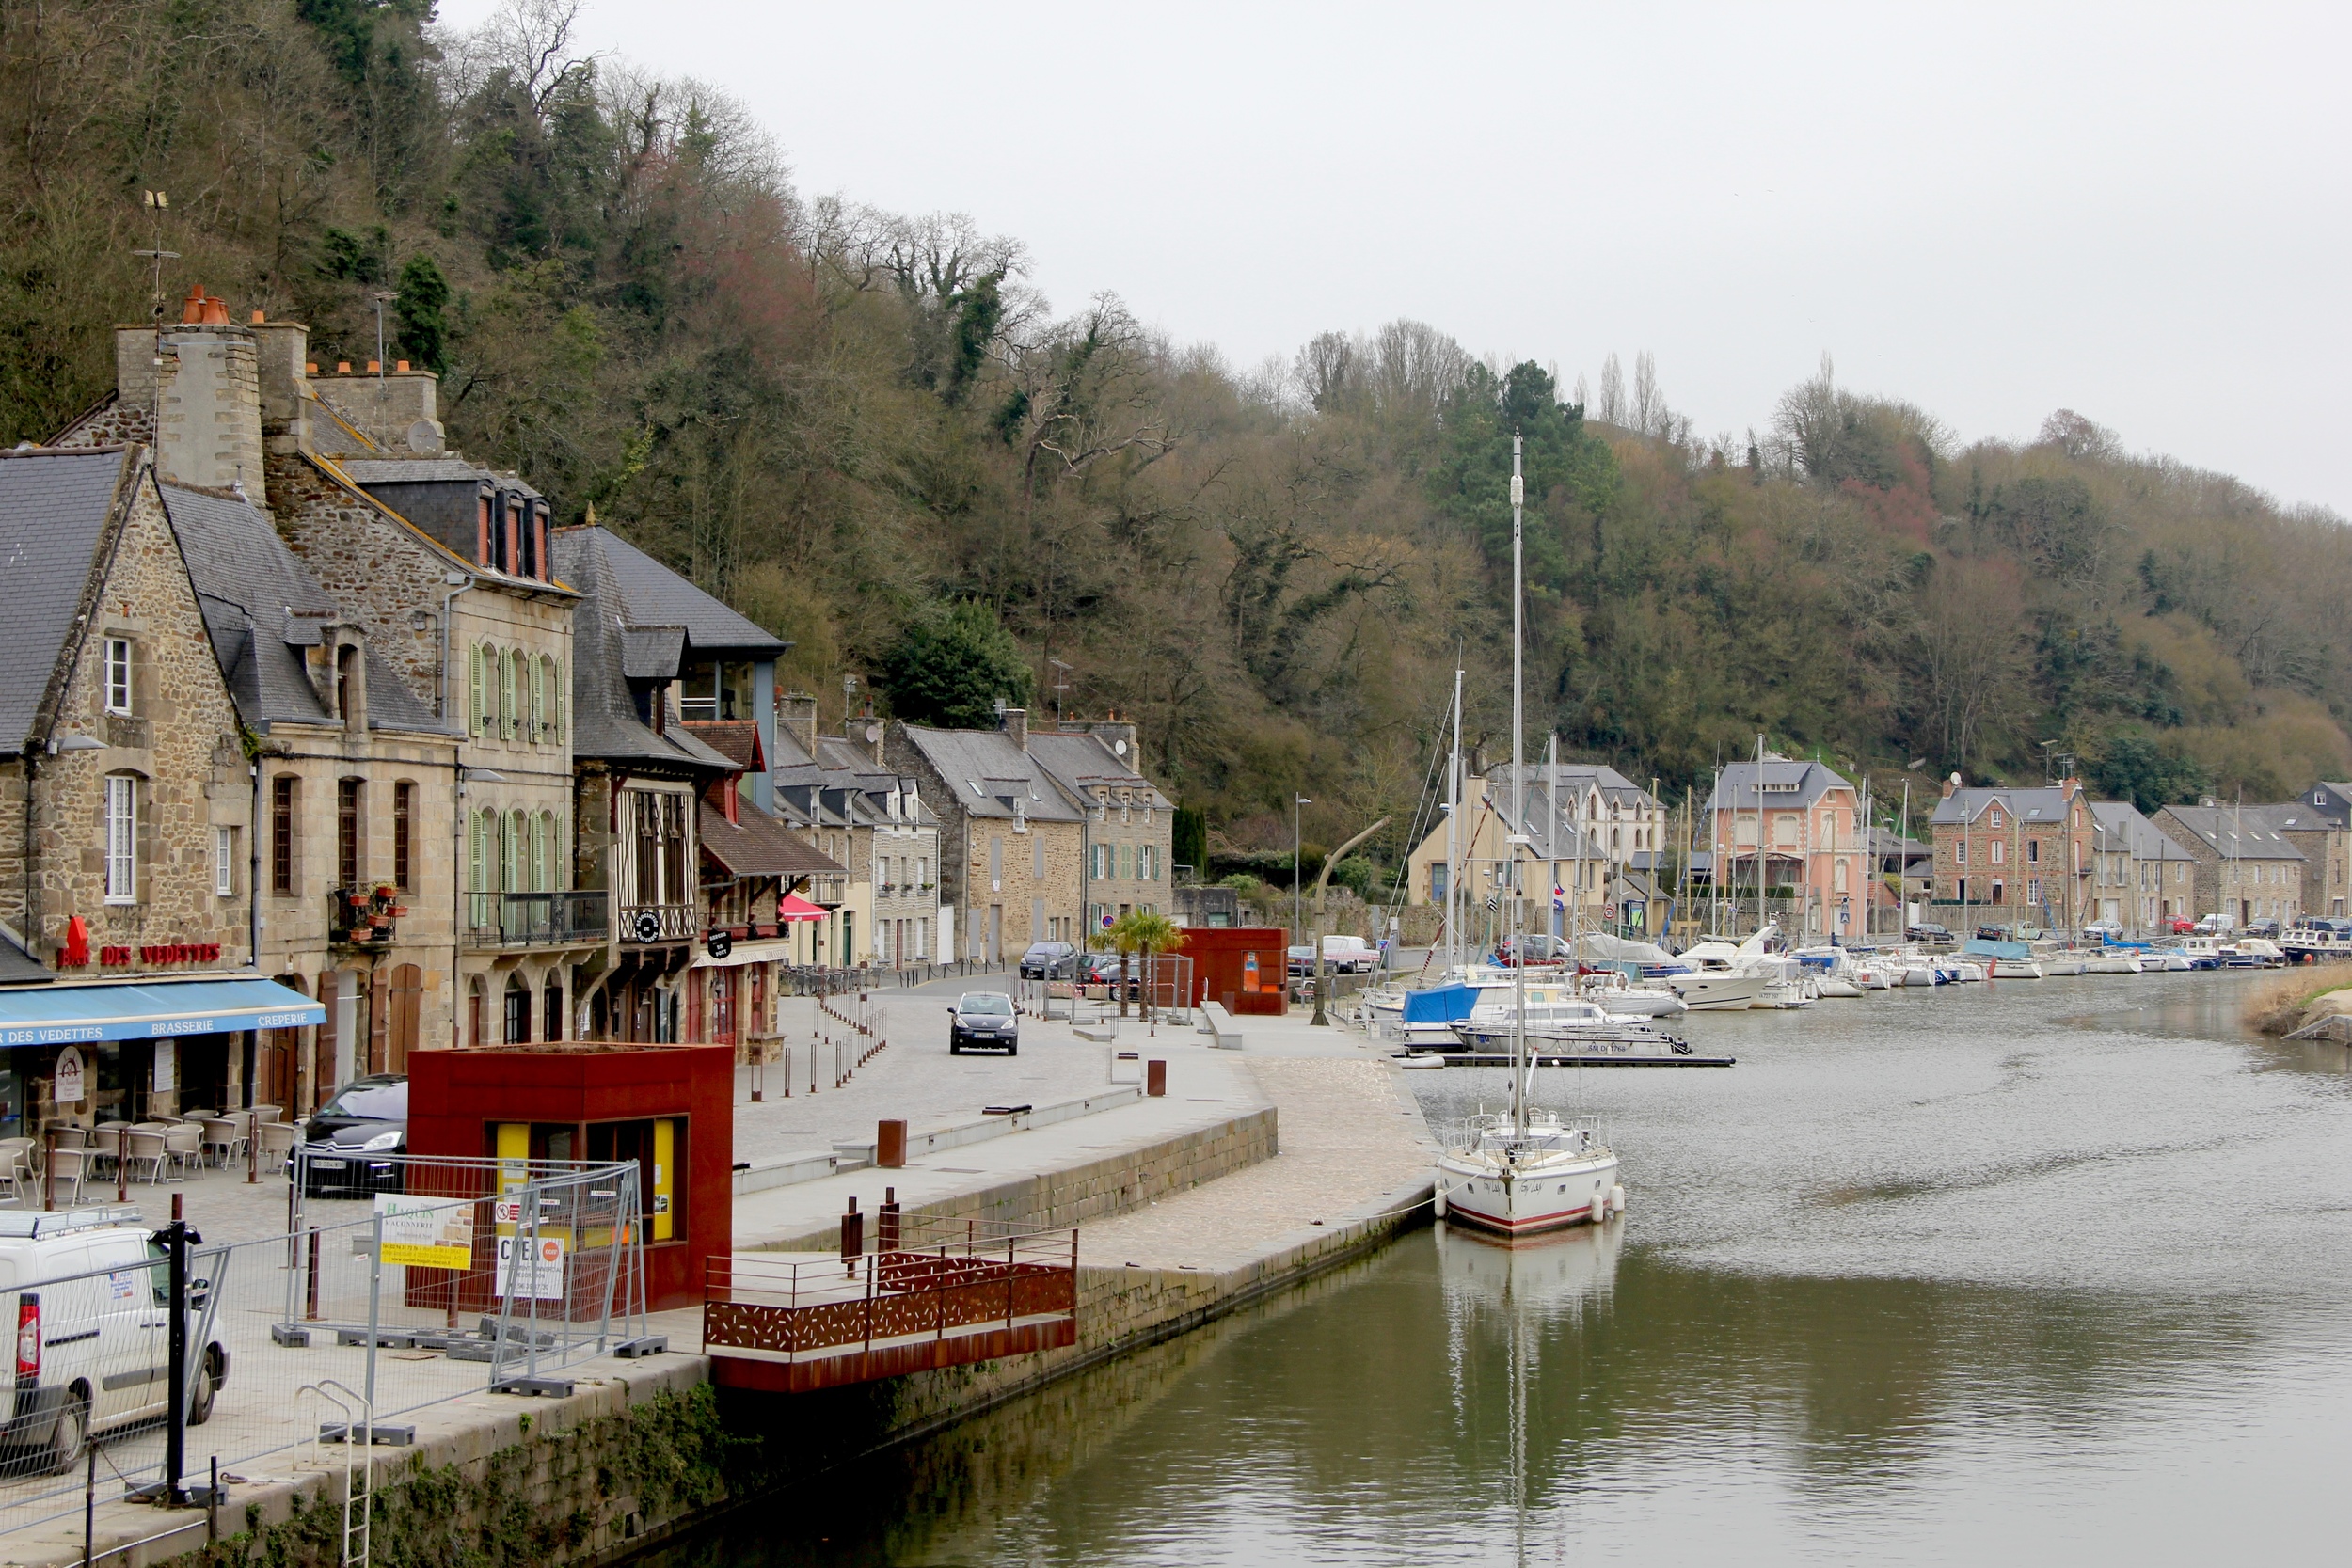 The Port of Dinan, France along the River Rance